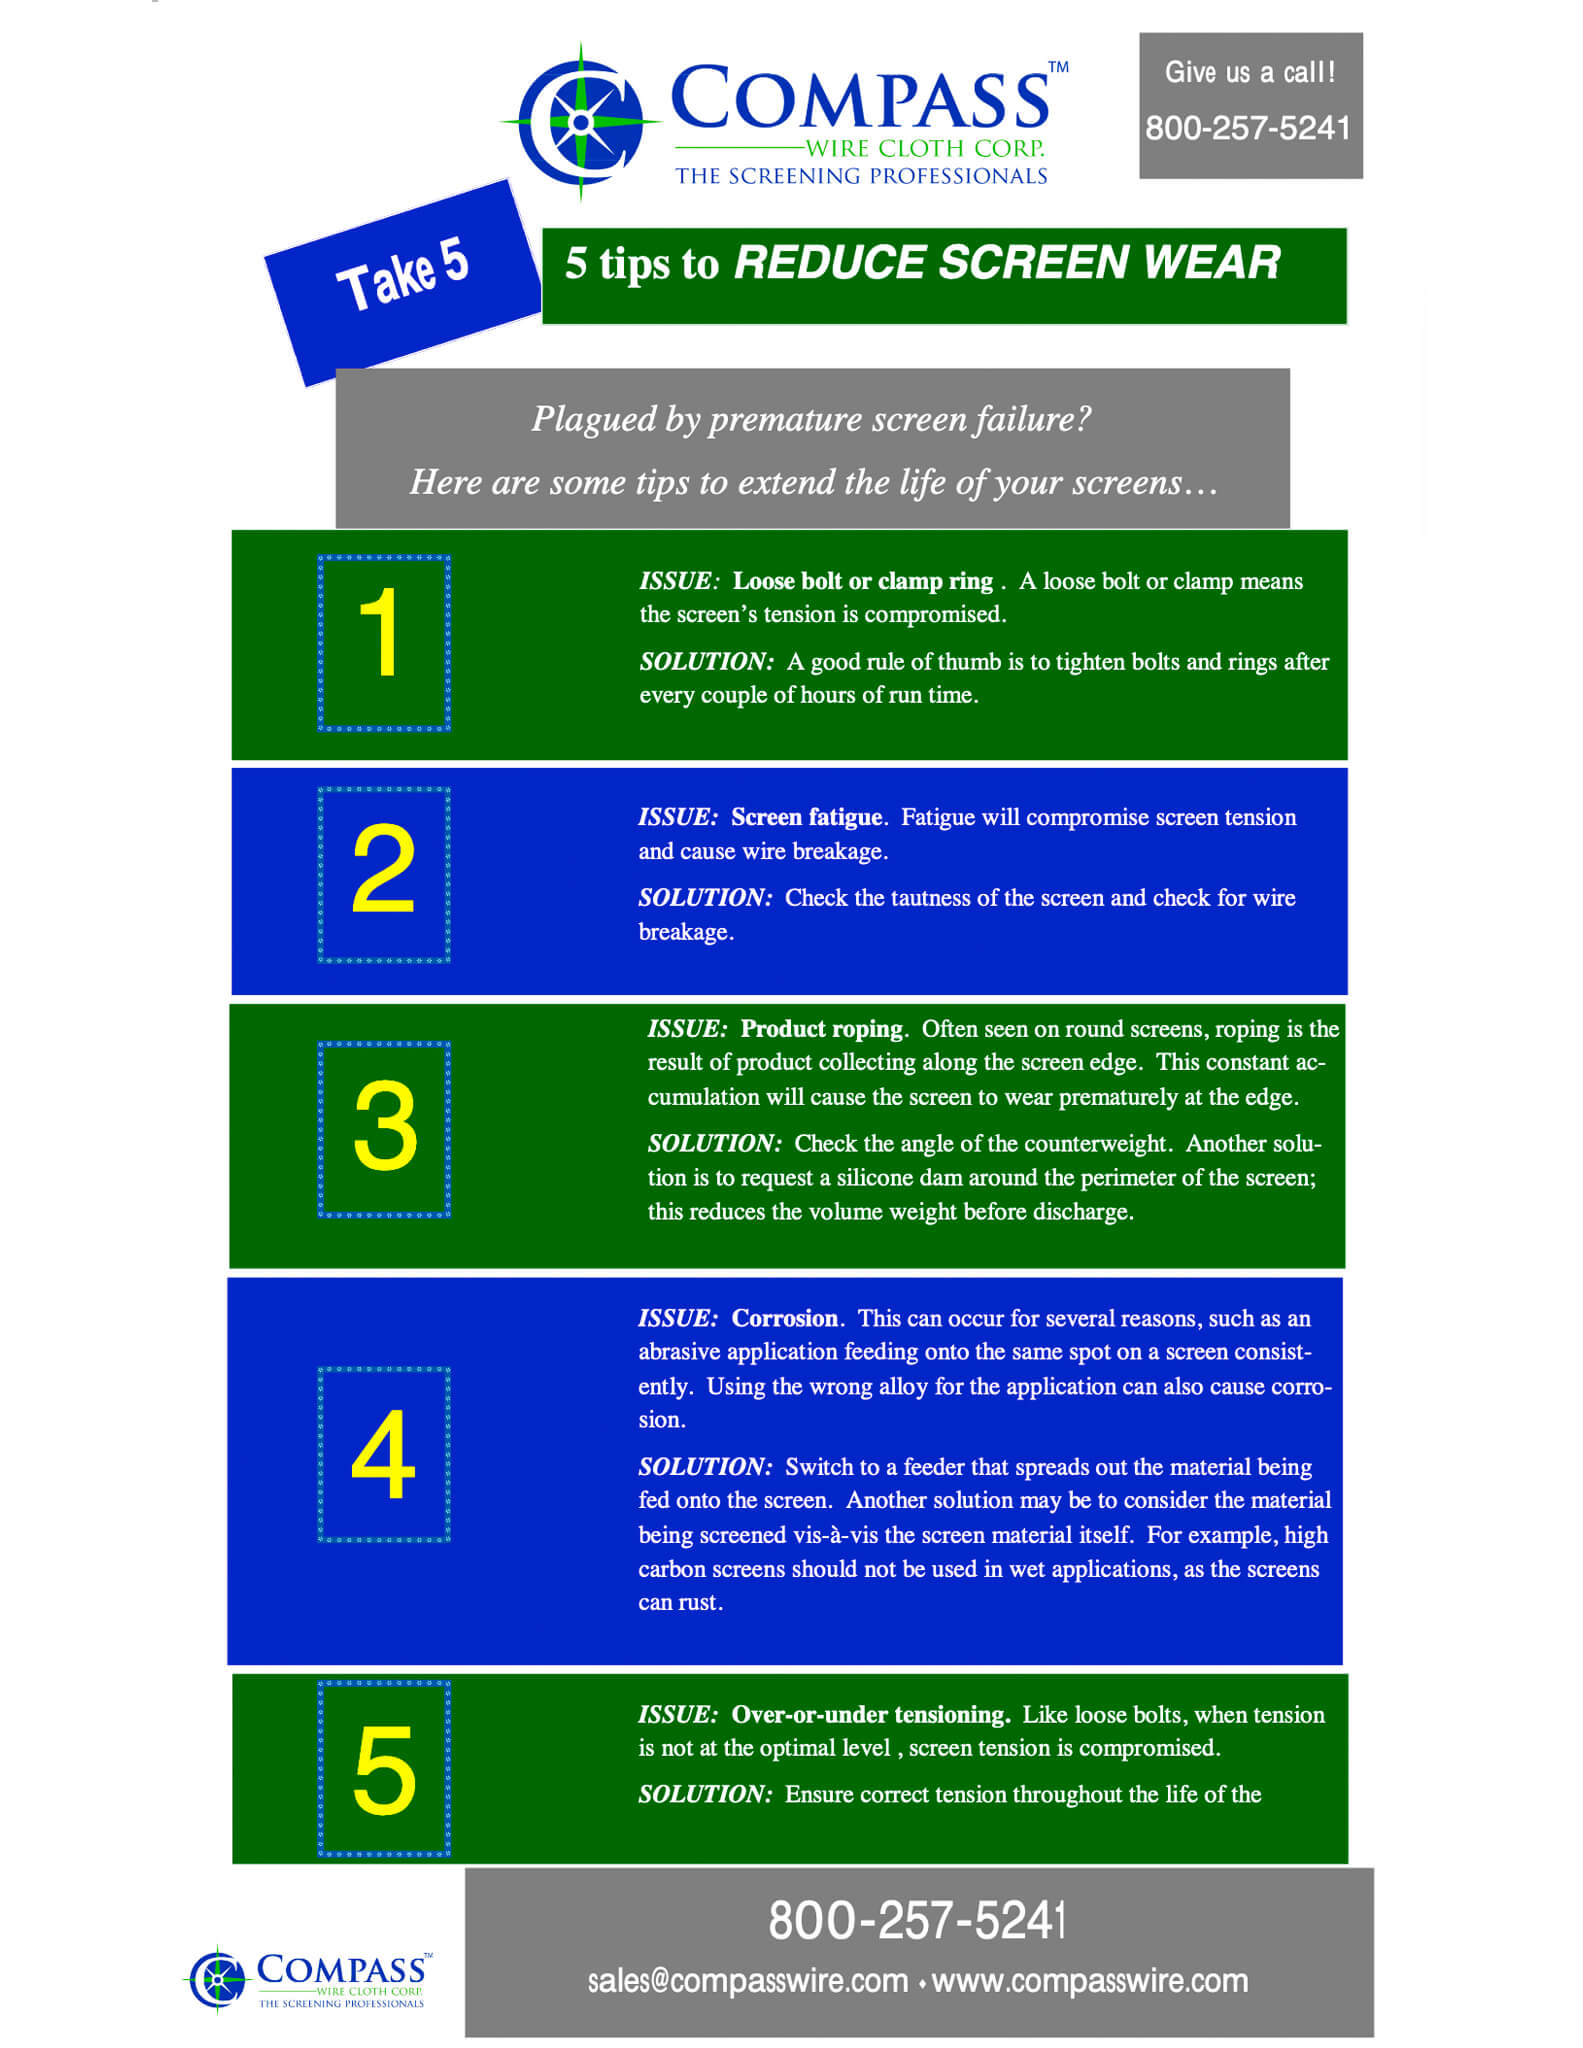 5 Tips to Reduce Screen Wear